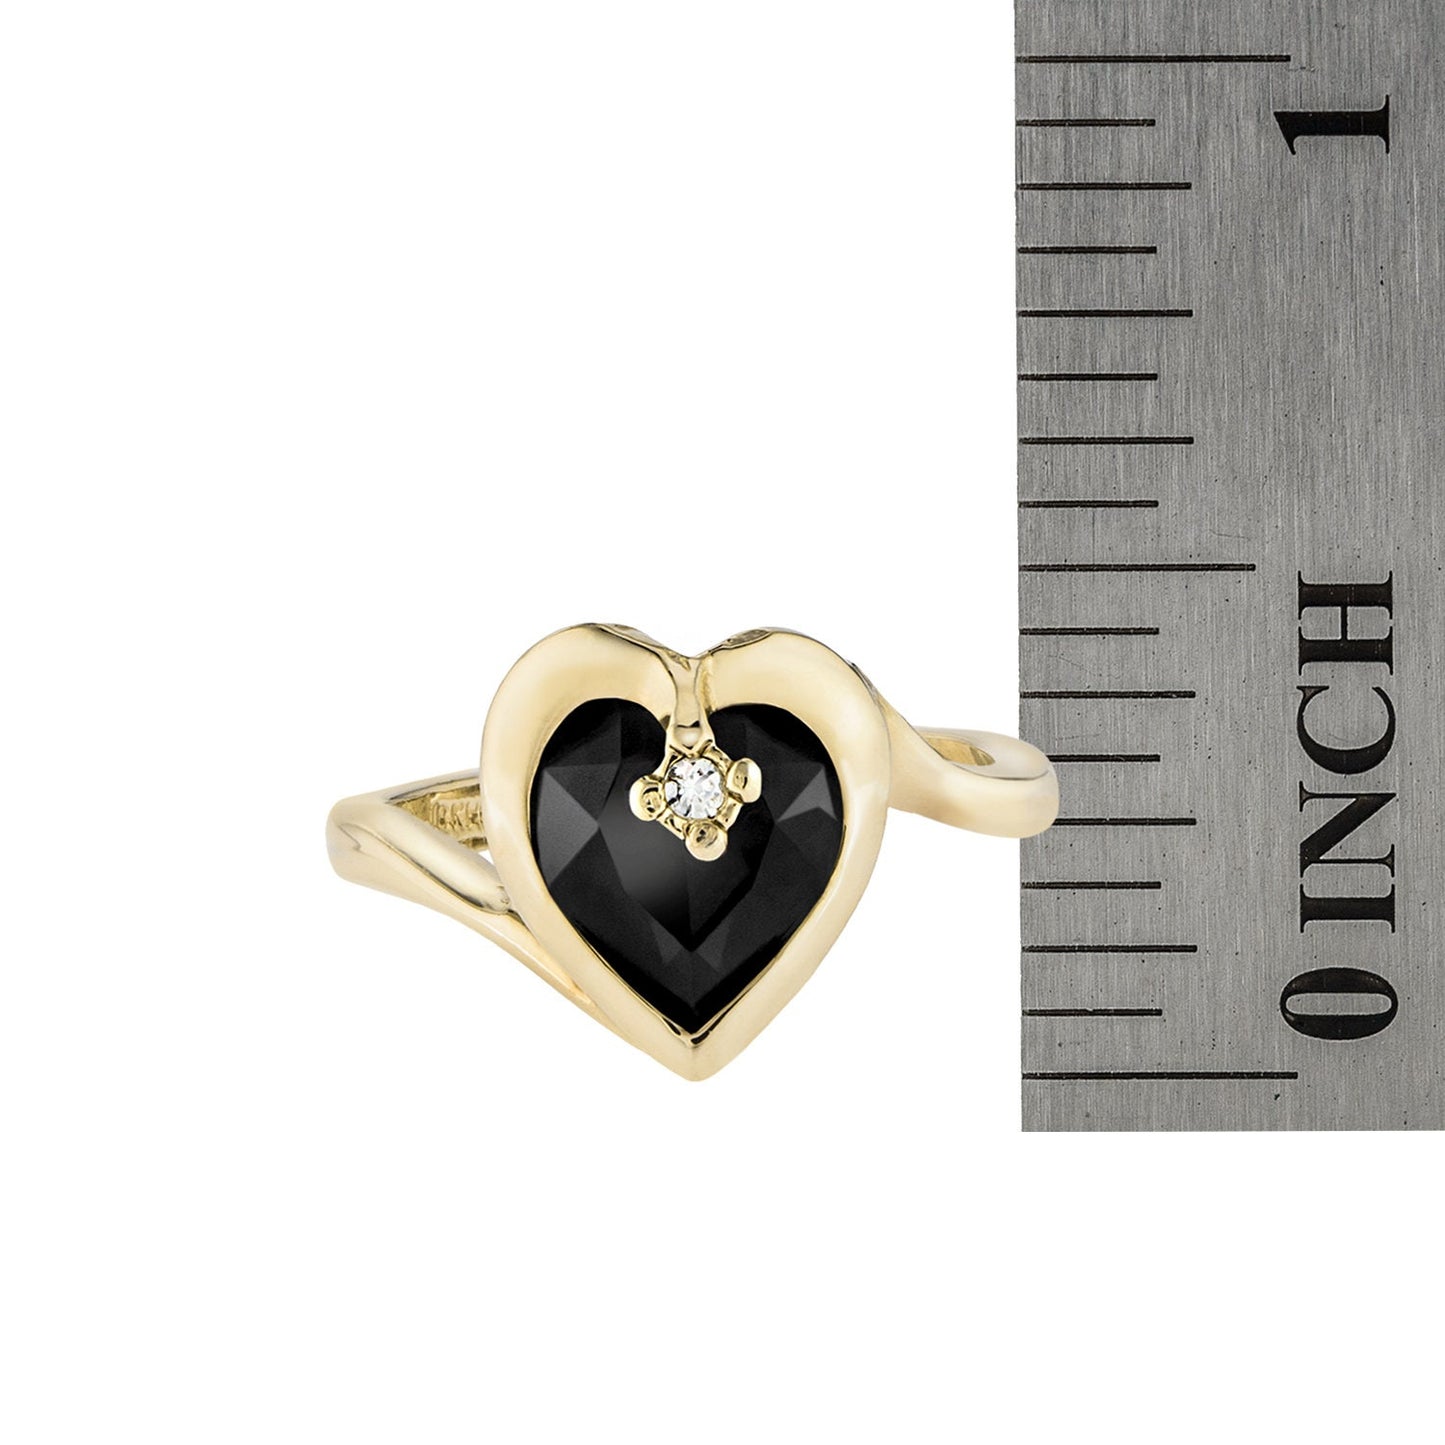 Vintage Ring 1970s Heart Shape Ring with Jet Black Swarovski Crystal 18k Gold Antique Womans Jewelry #R1400 - Limited Stock - Never Worn